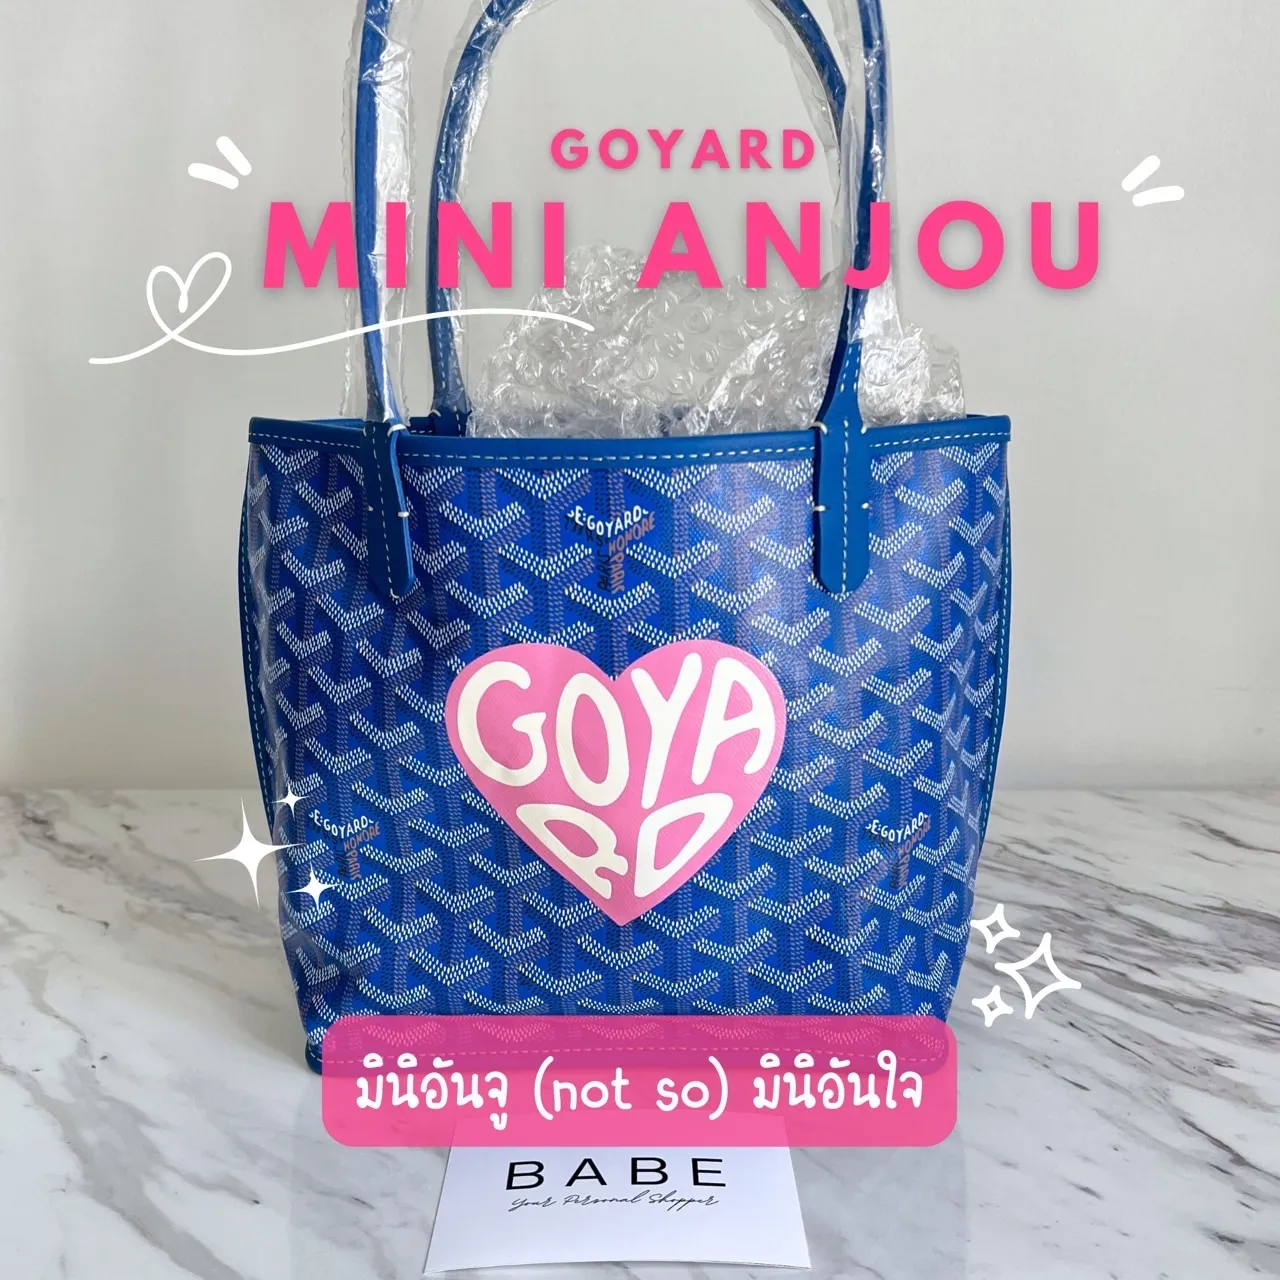 Goyard Mini Anjou: The tote bag for people who don't love tote bags. 